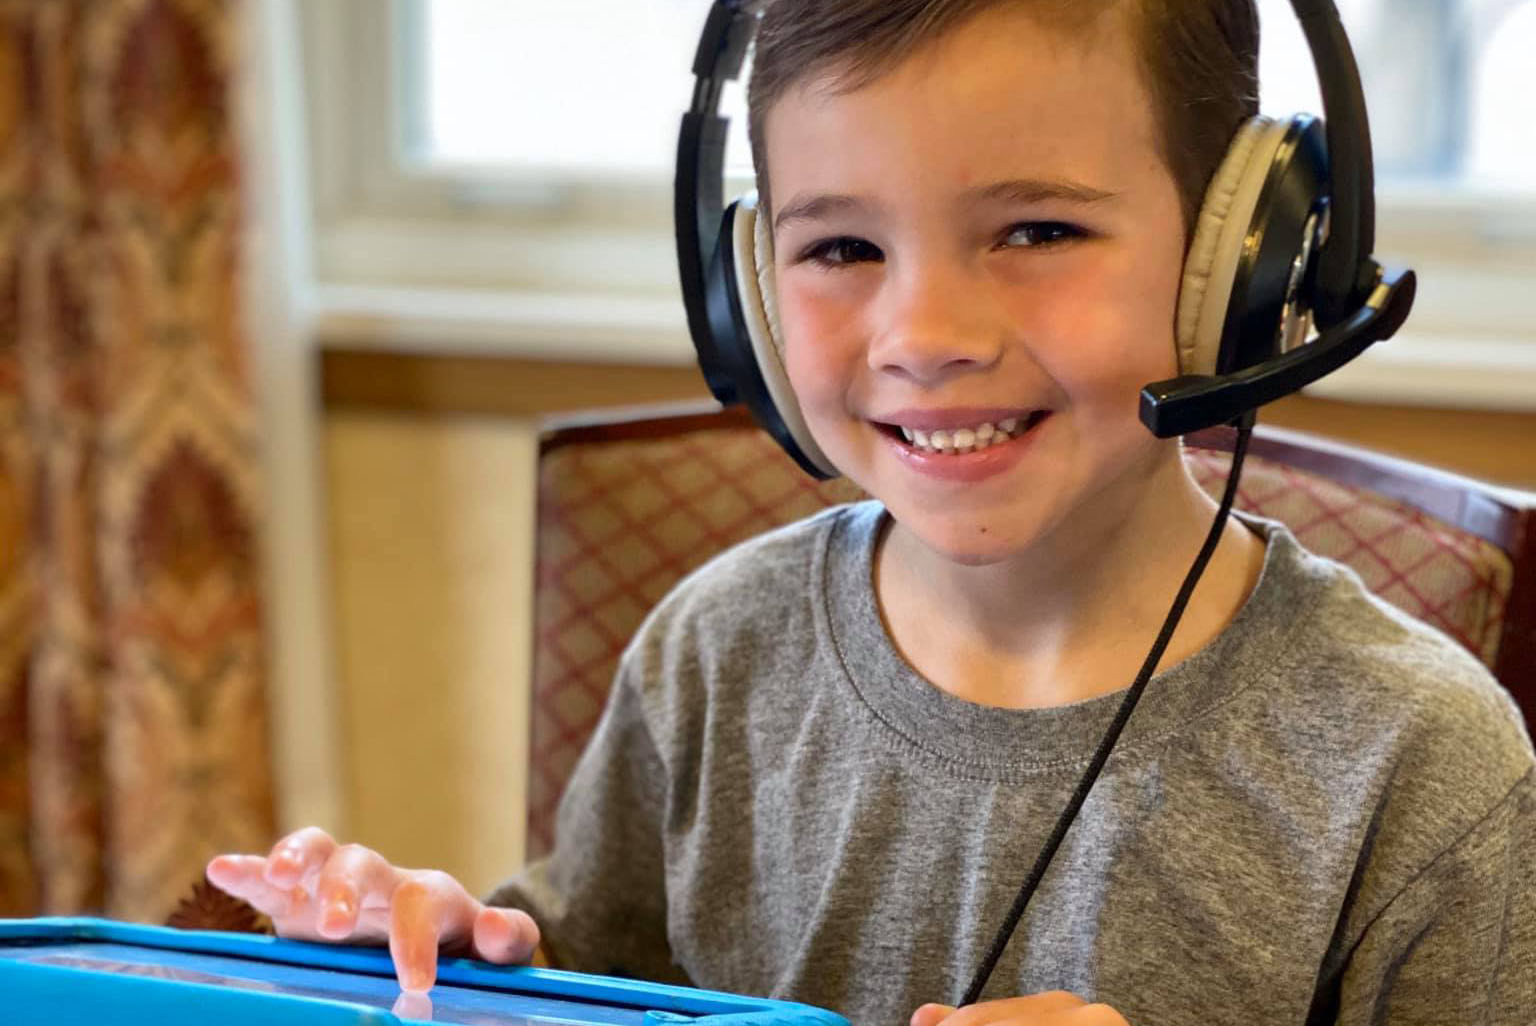 A Milton Hershey School elementary student participates in virtual learning from his student home.